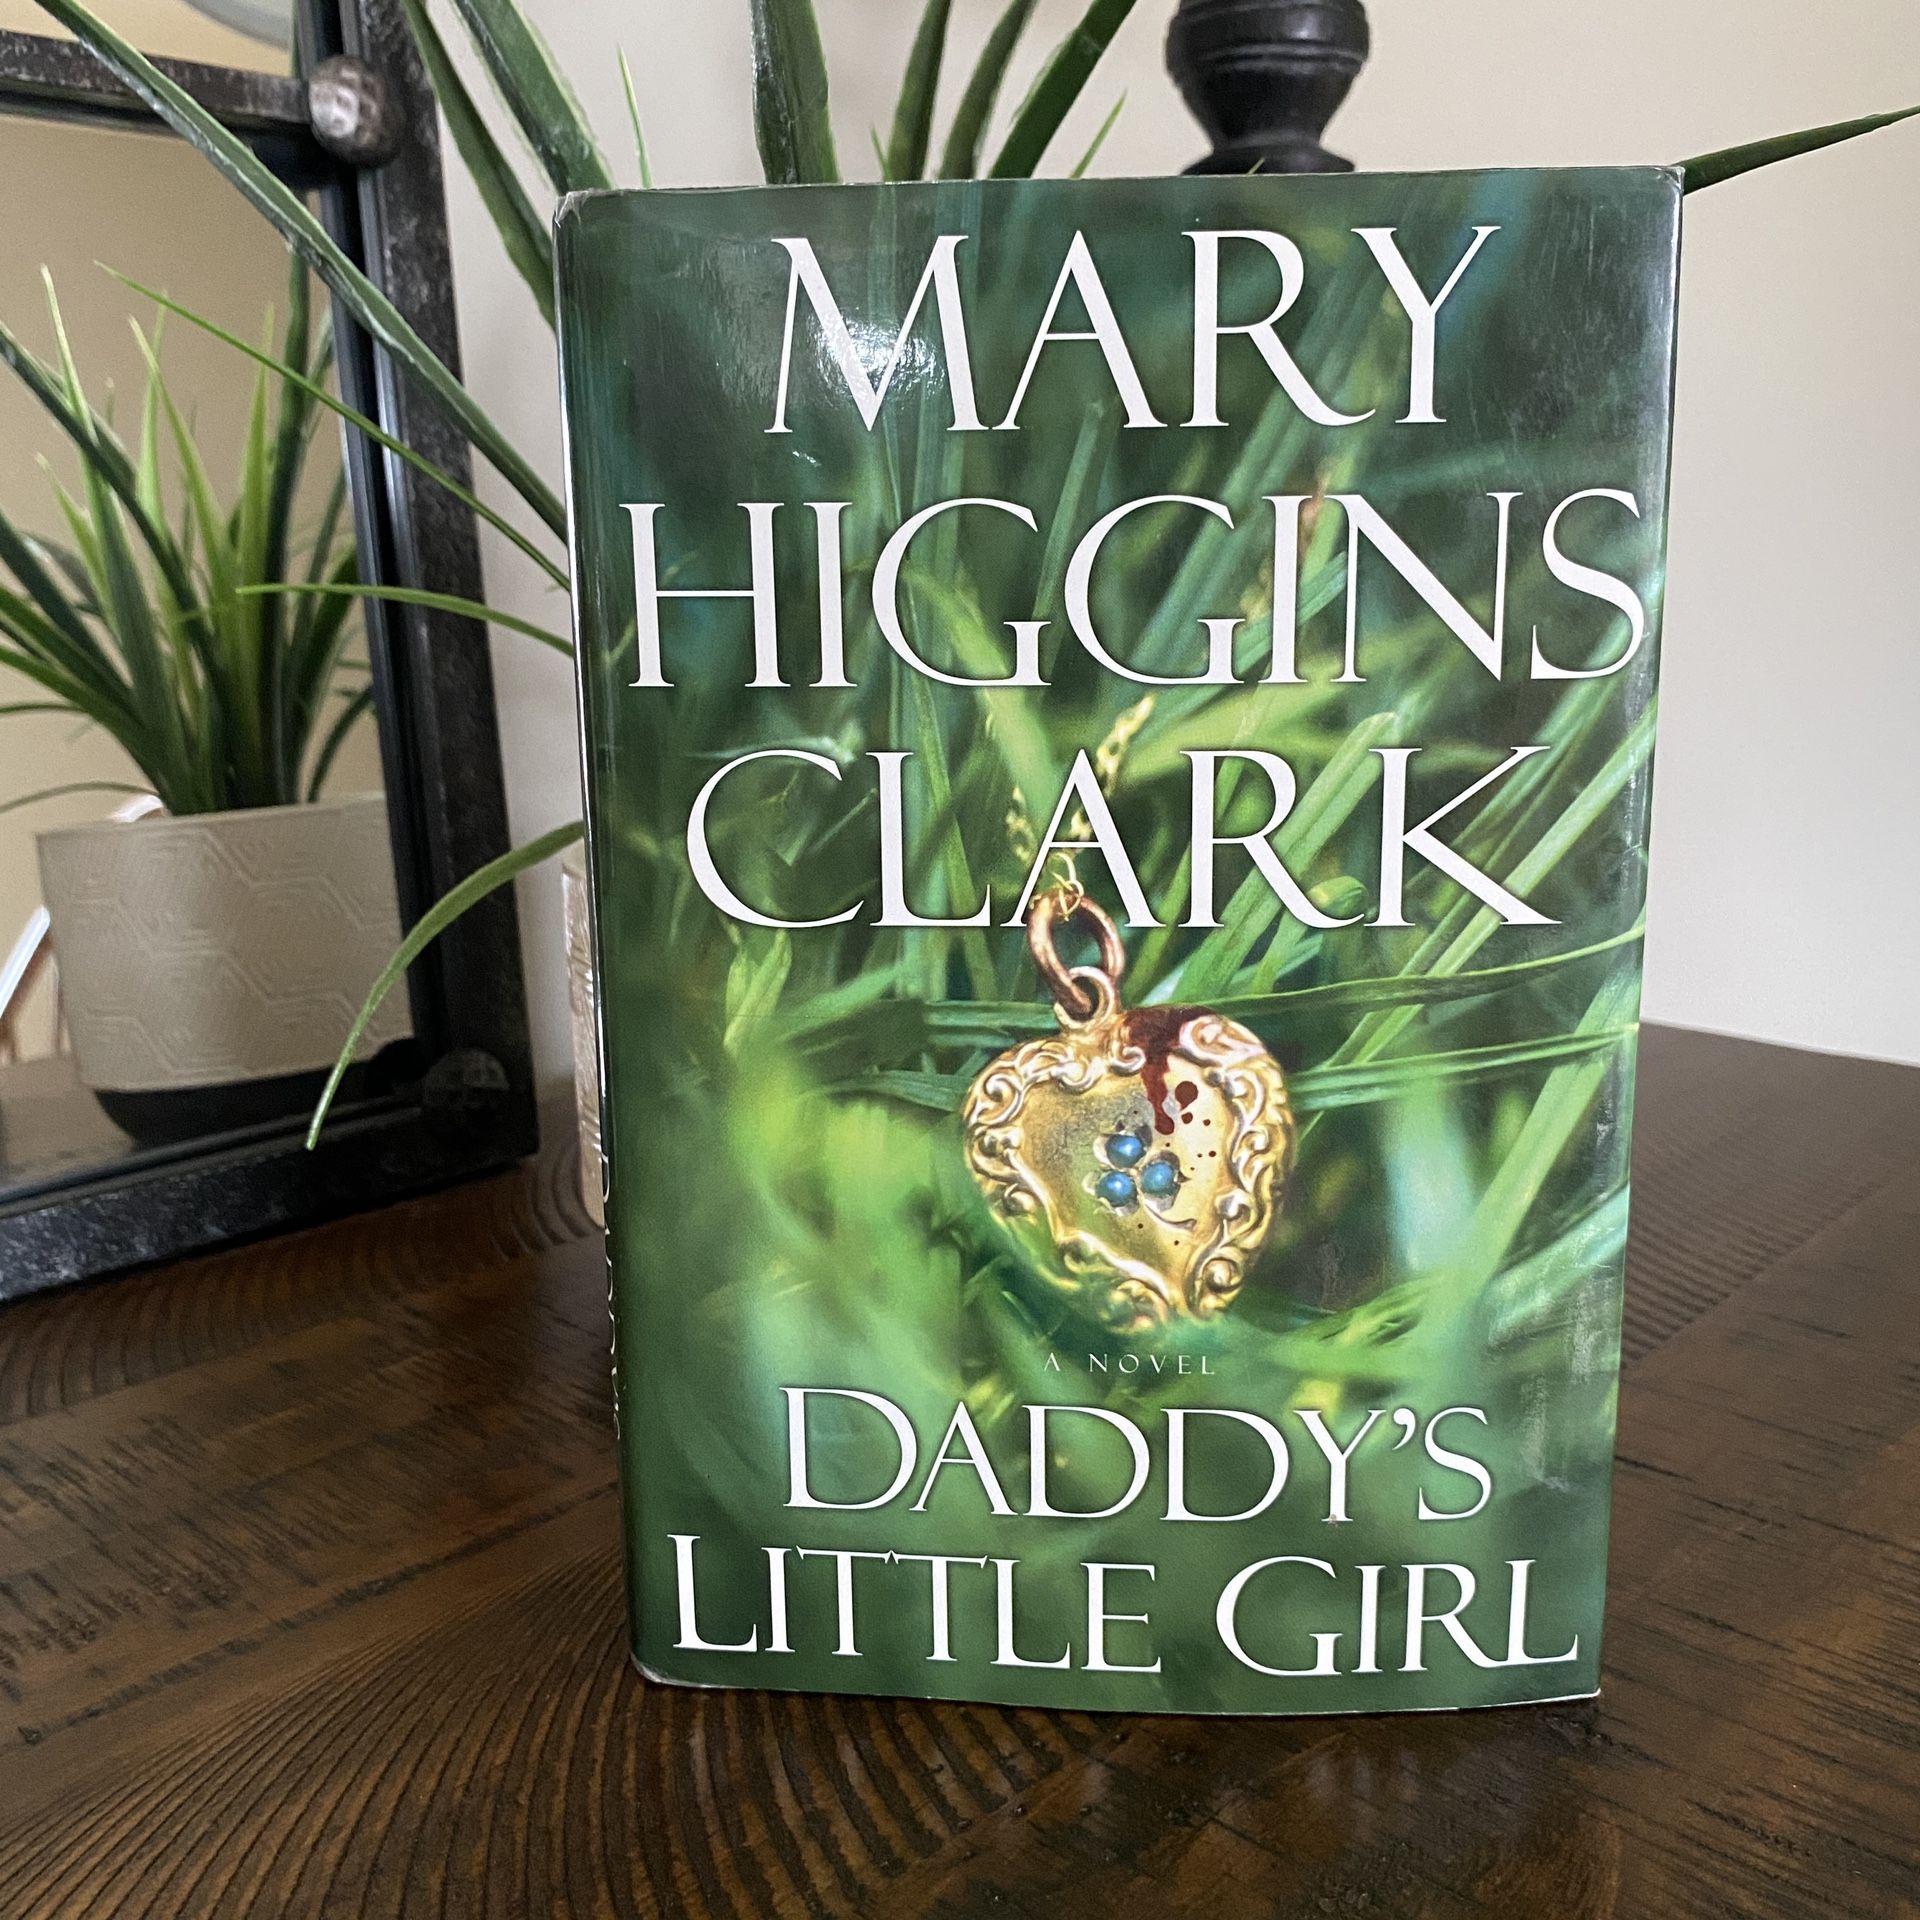 Book Daddy’s Little Girl A Novel By Mary Higgins Clark Hardcover 2002 